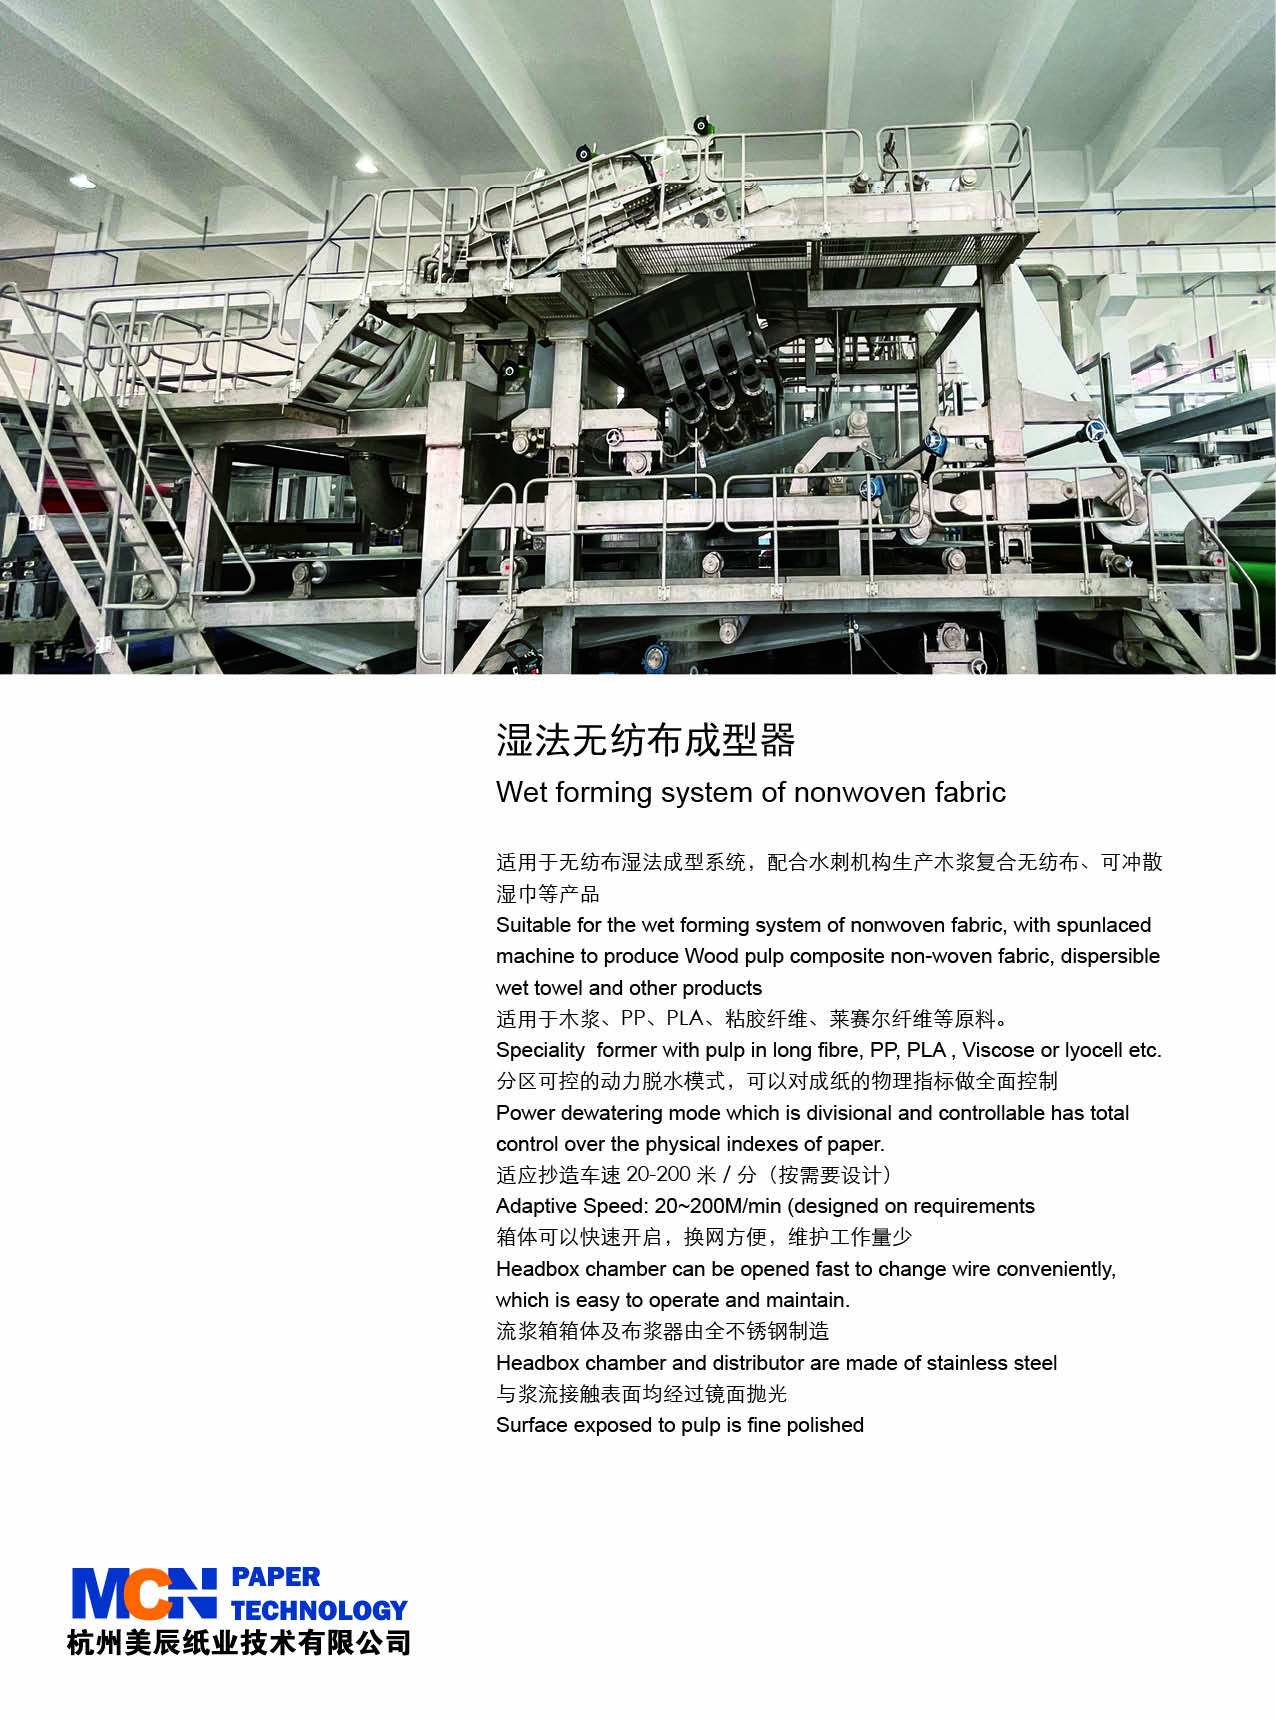 Wet forming system of nonwoven fabric